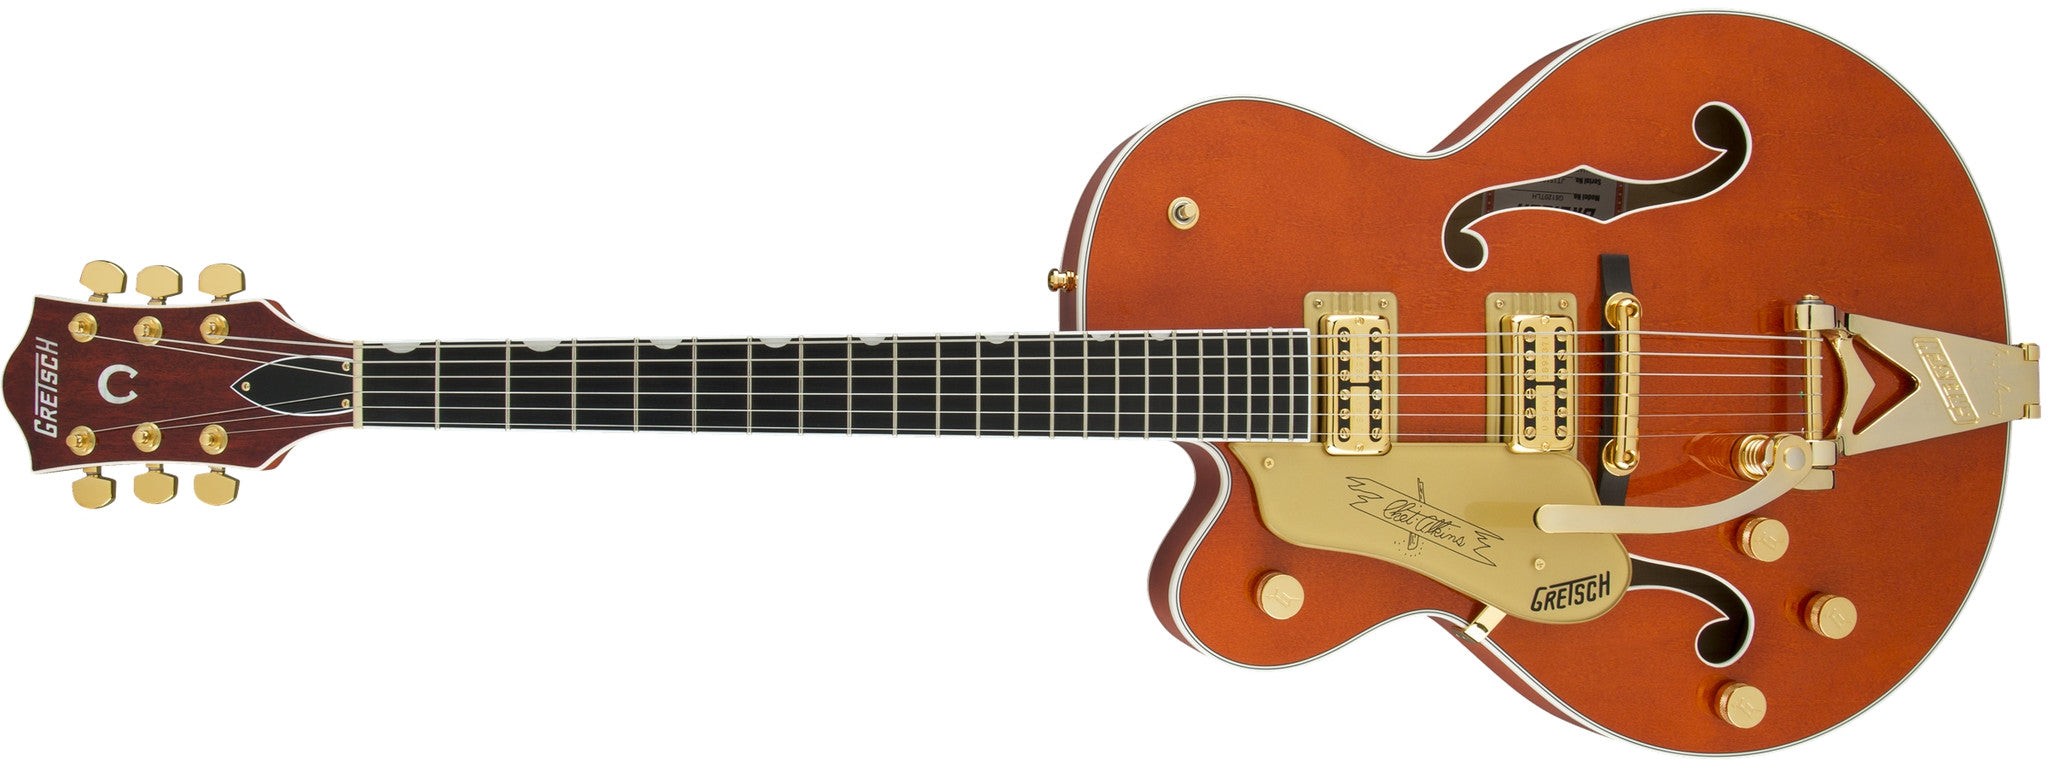 Gretsch G6120TLH Players Edition Nashville with Bigsby, Left-Handed, Filter'Tron Pickups, Orange Stain 2401320822 - L.A. Music - Canada's Favourite Music Store!